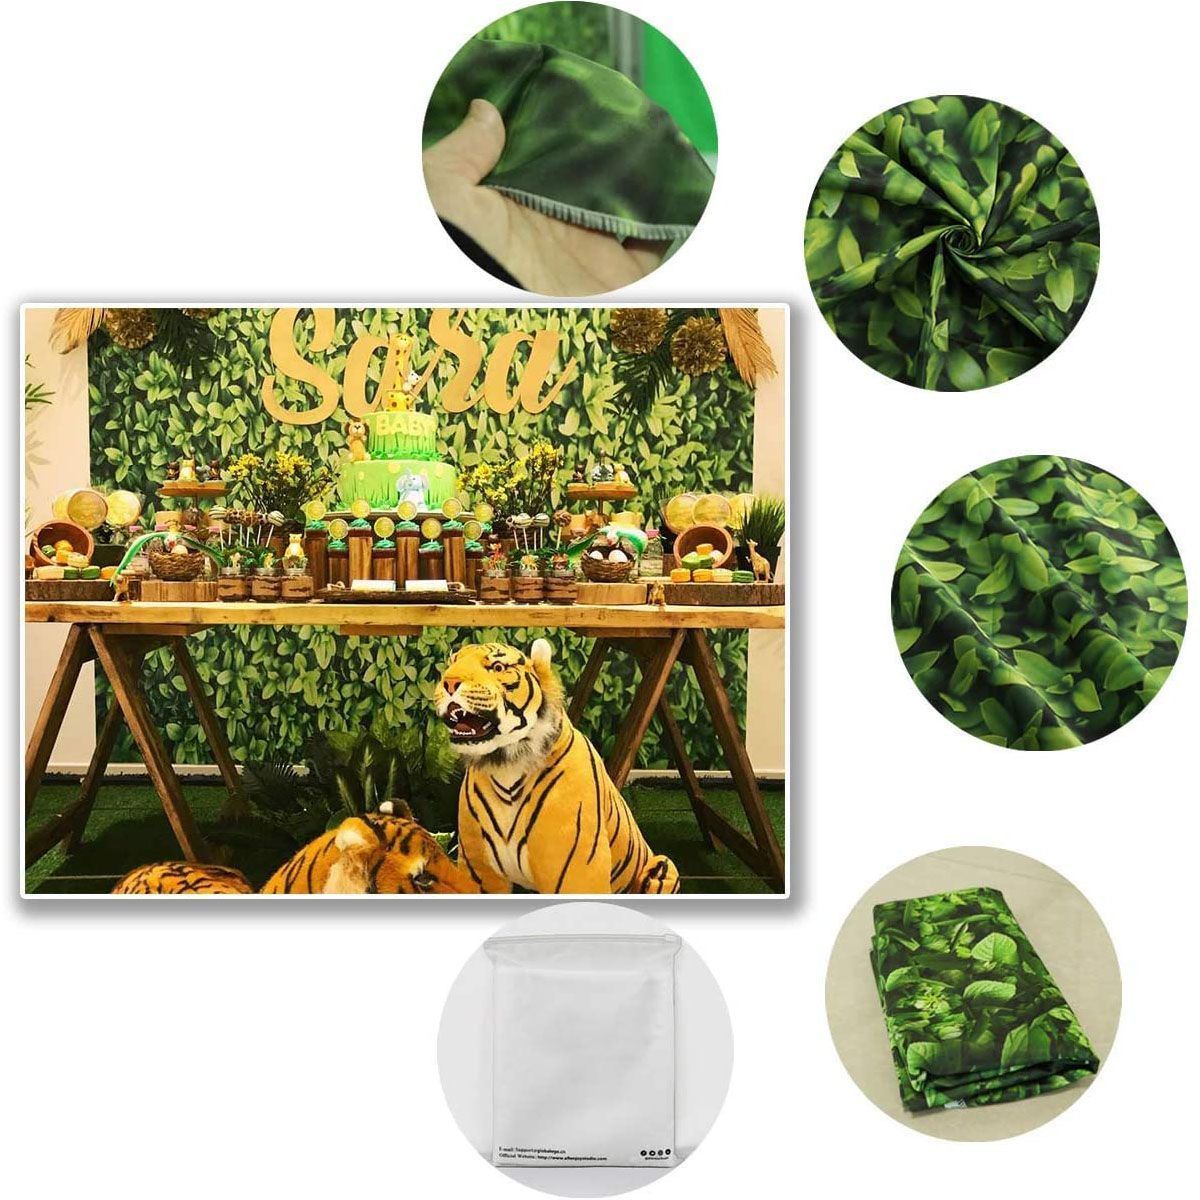 5x3ft-7x5ft-10x65ft-Green-Leaves-Wall-Backdrop-Photography-Wall-Decor-Background-for-Photo-Video-Wed-1670643